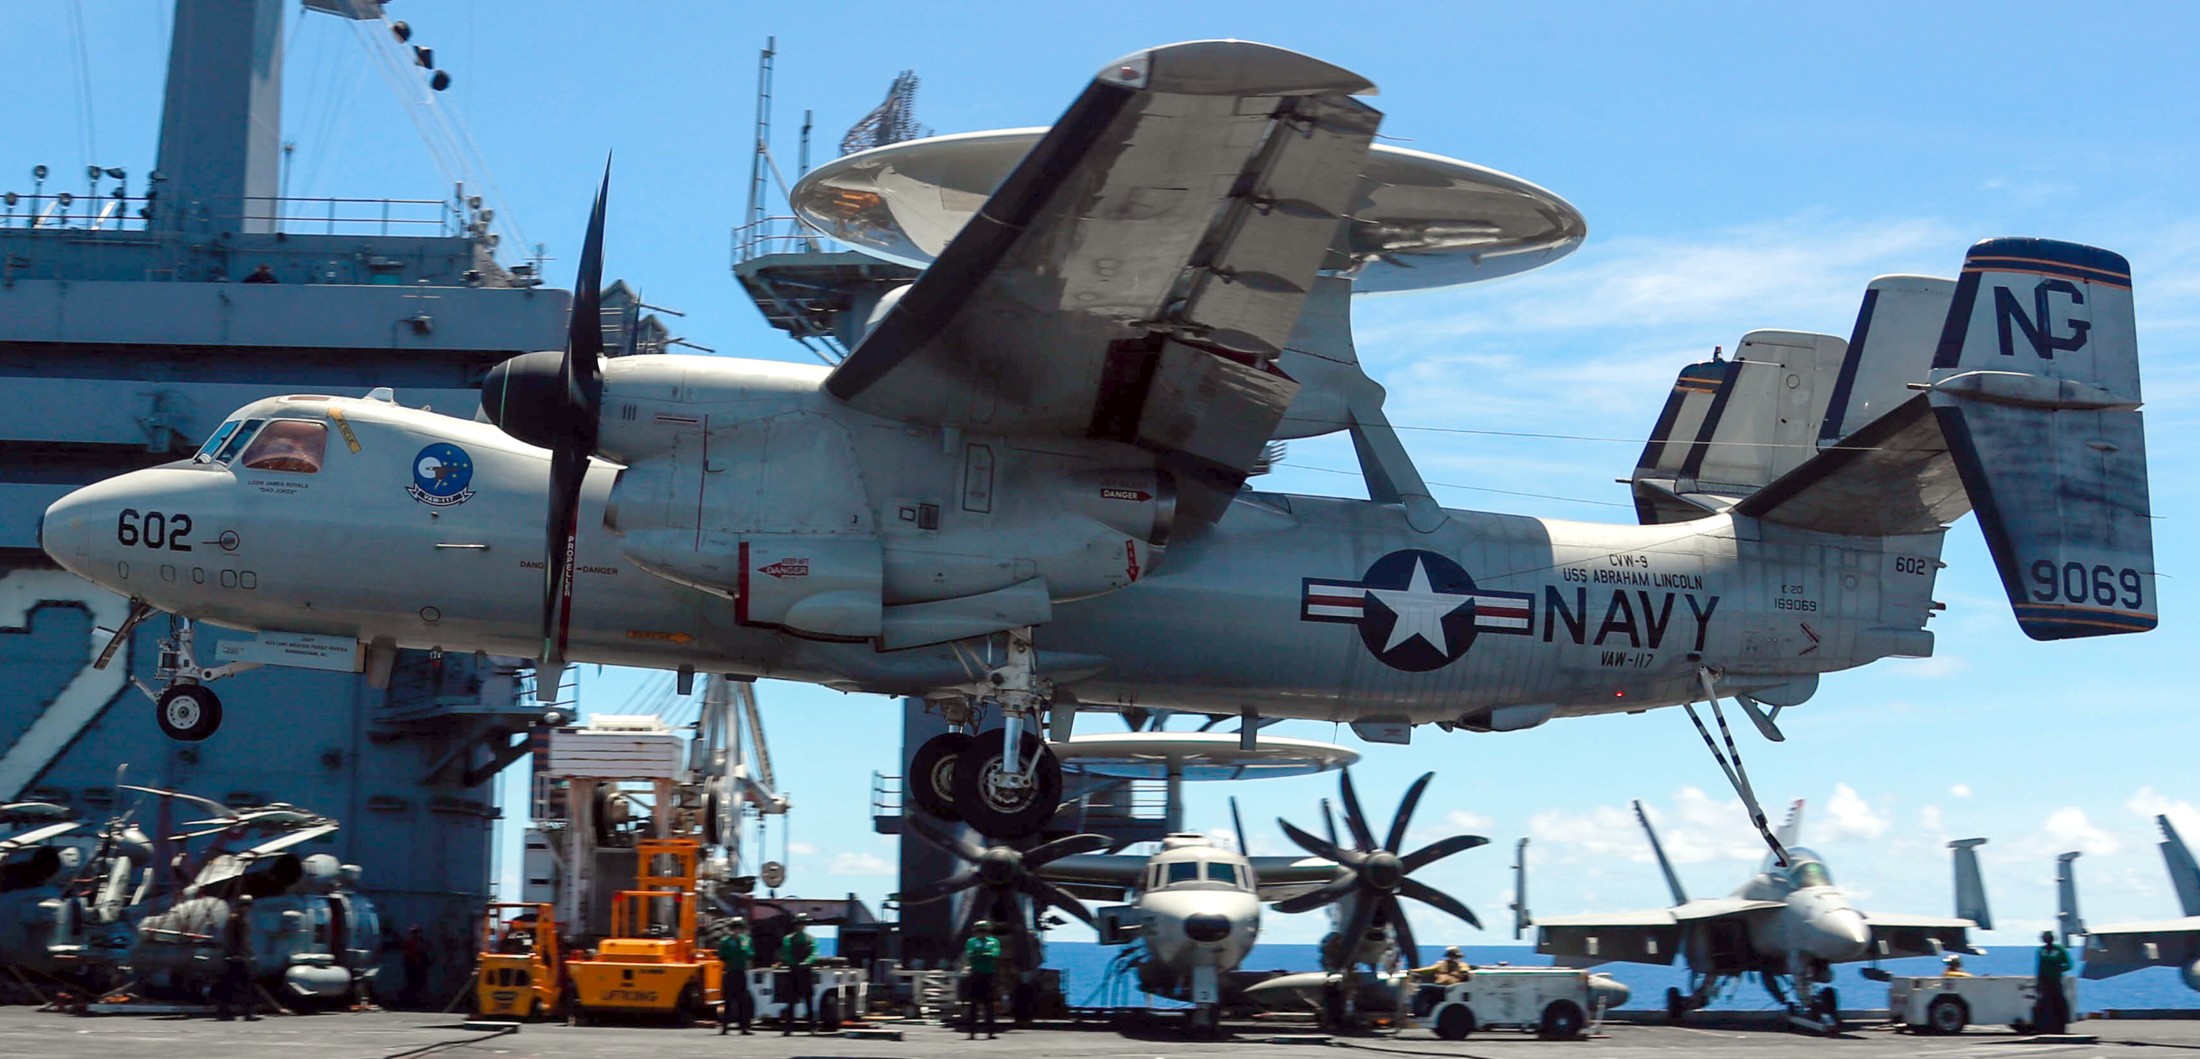 vaw-117 wallbangers airborne command and control squadron navy e-2d hawkeye cvw-9 uss abraham lincoln cvn-72 08